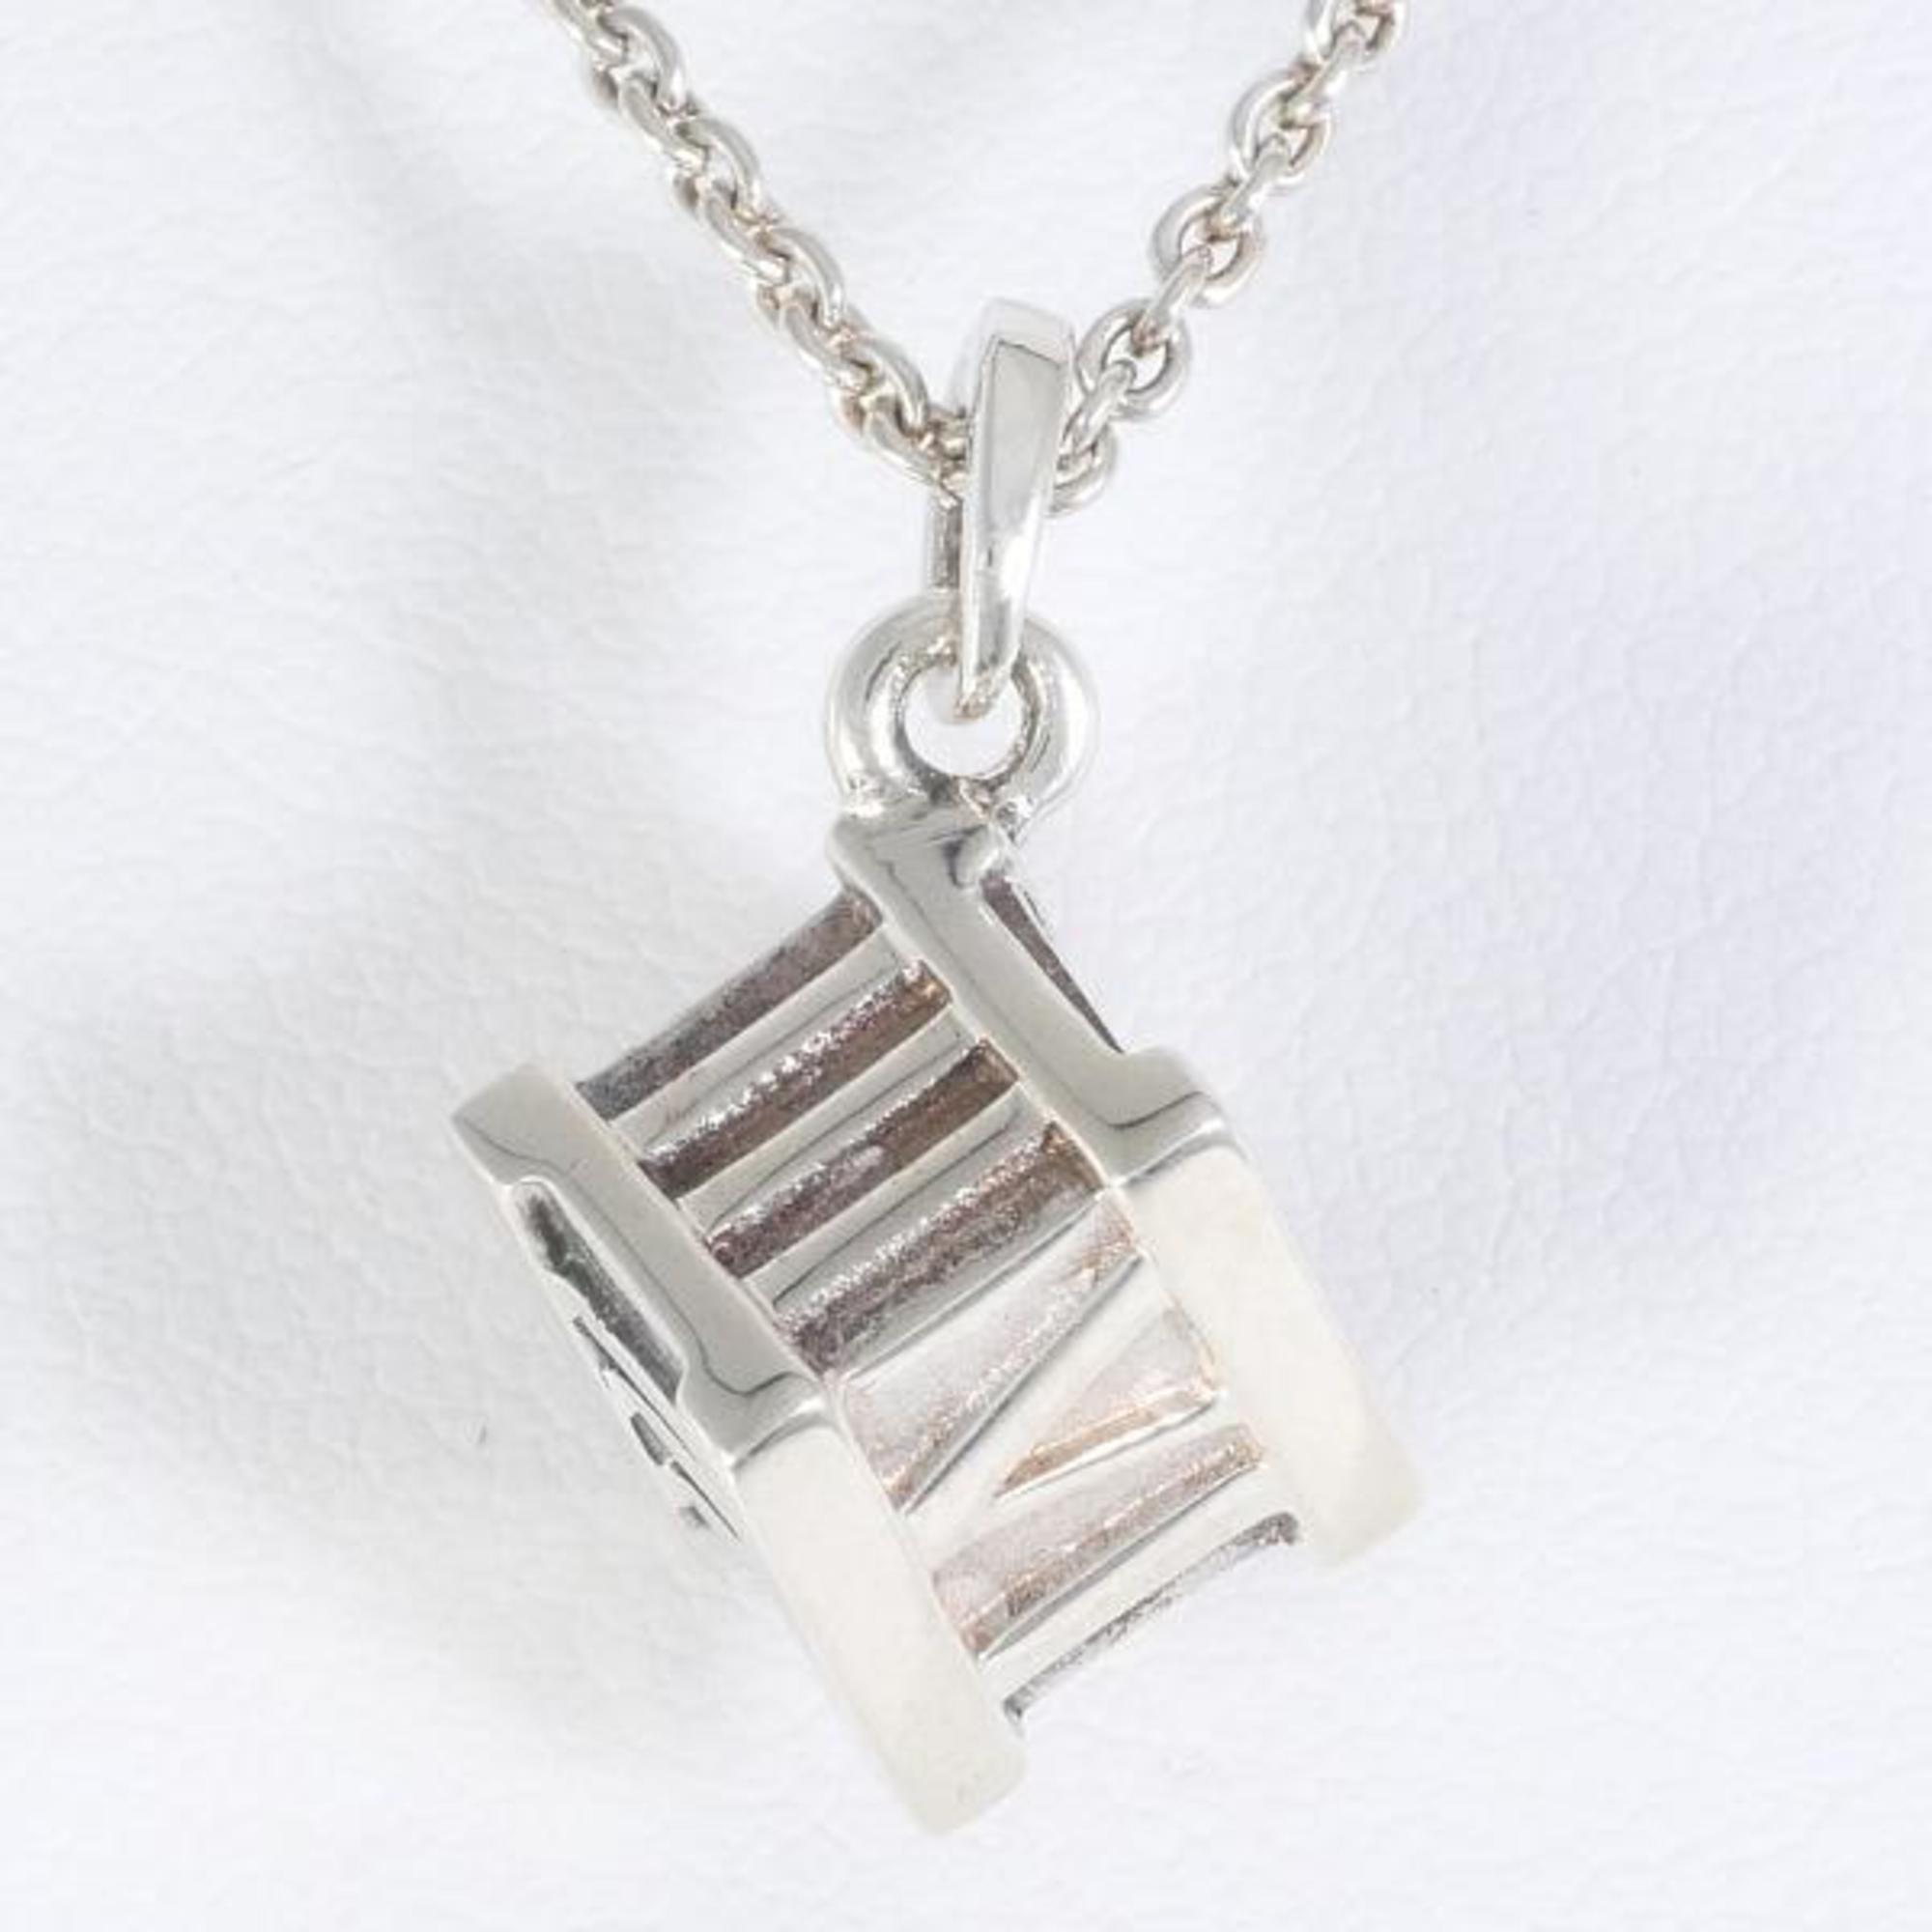 Tiffany Atlas Cube Silver Necklace Total weight approx. 7.2g 40cm